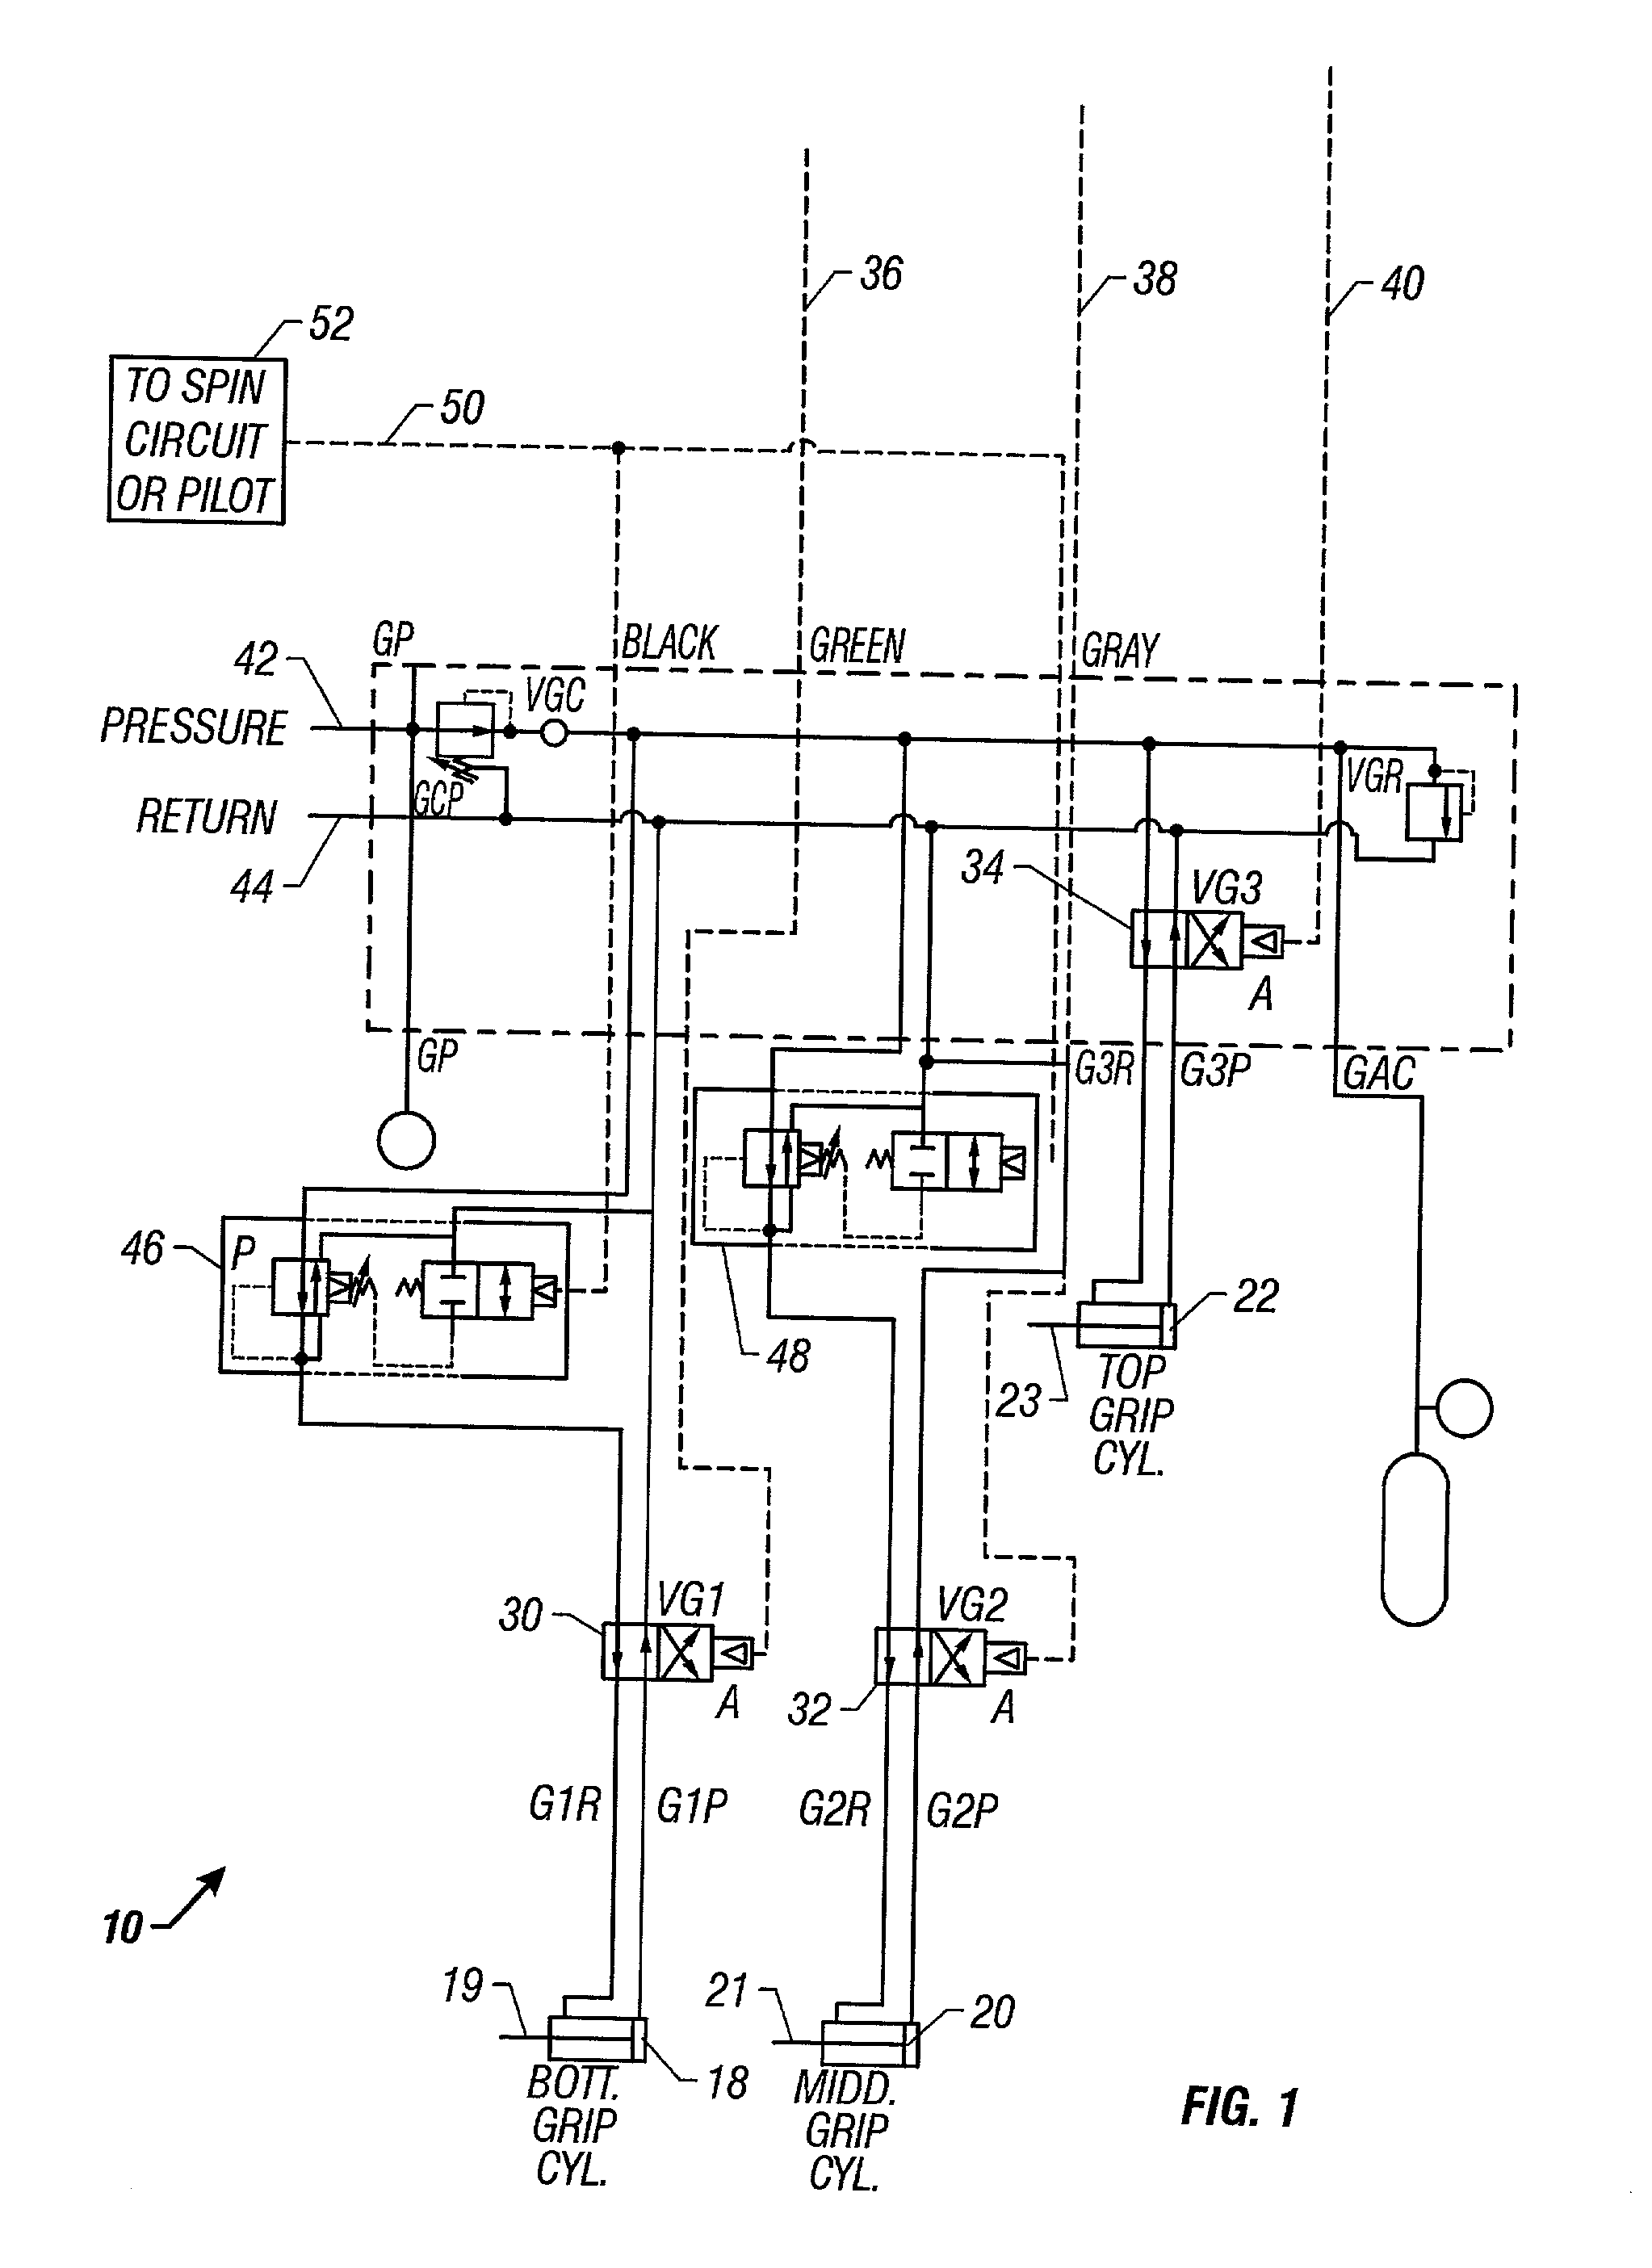 Apparatus and method for connecting wellbore tubulars